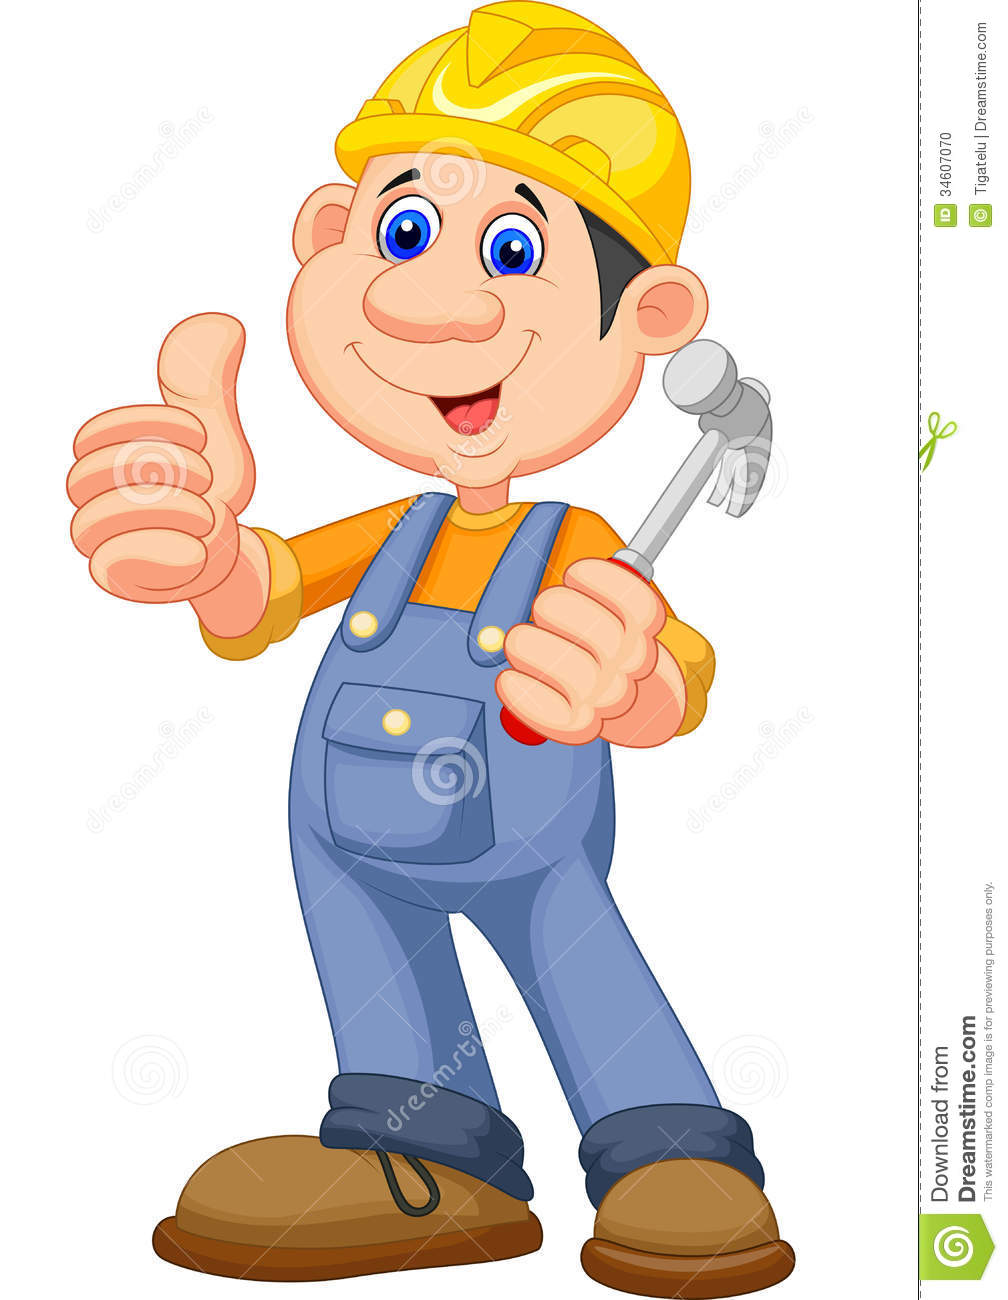 Construction worker clipart - Clipground